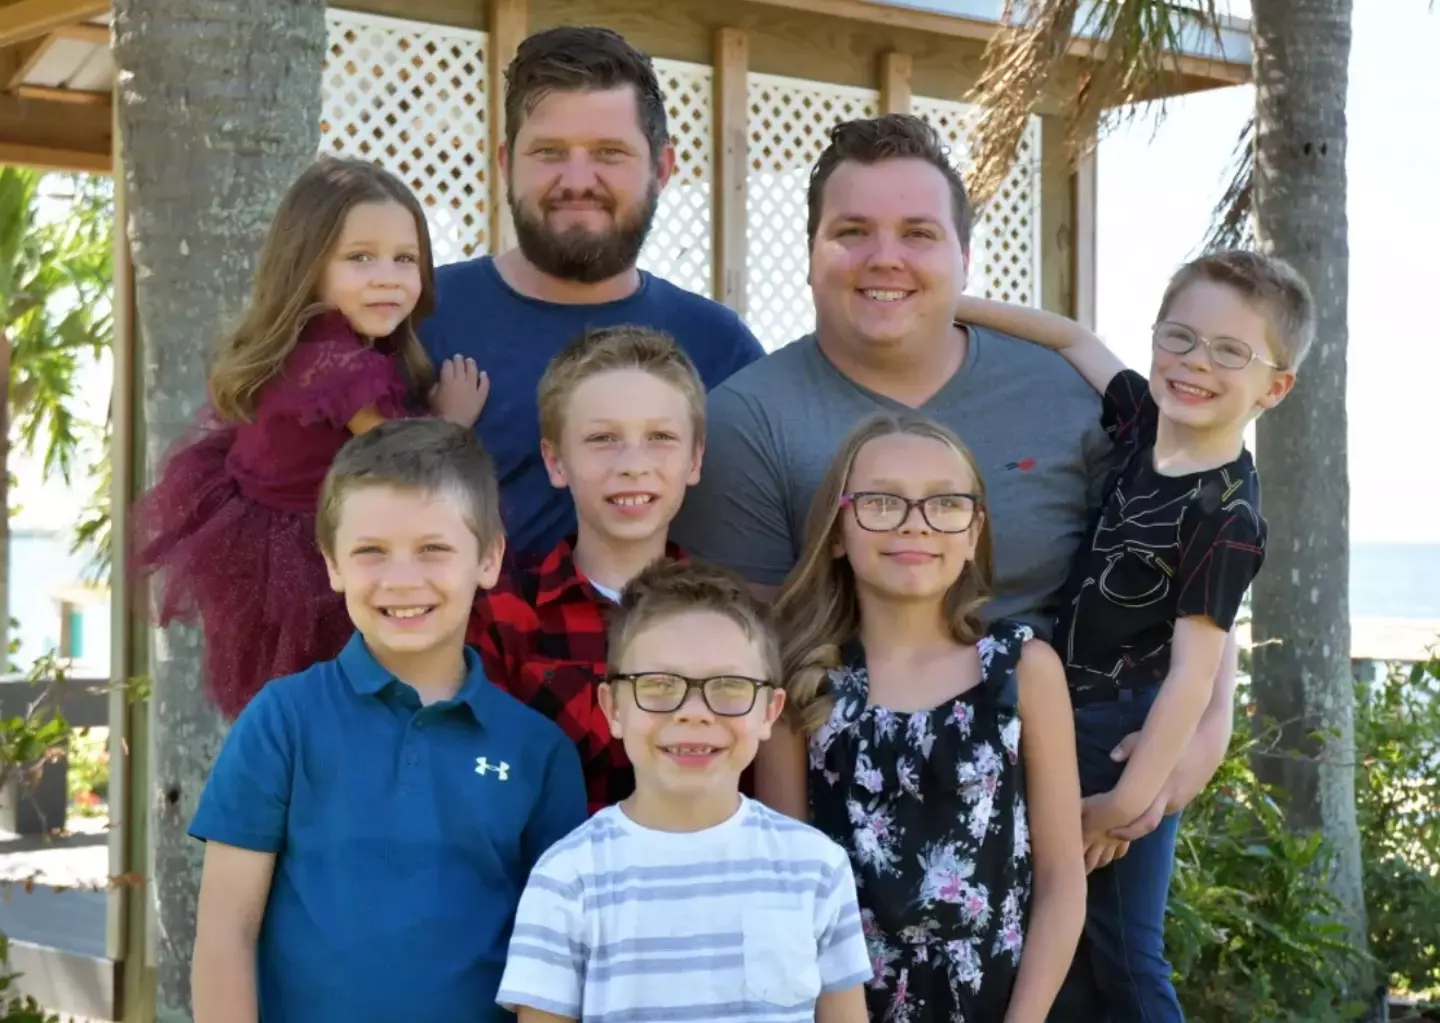 Dustin and Daniel adopted six siblings in May last year.